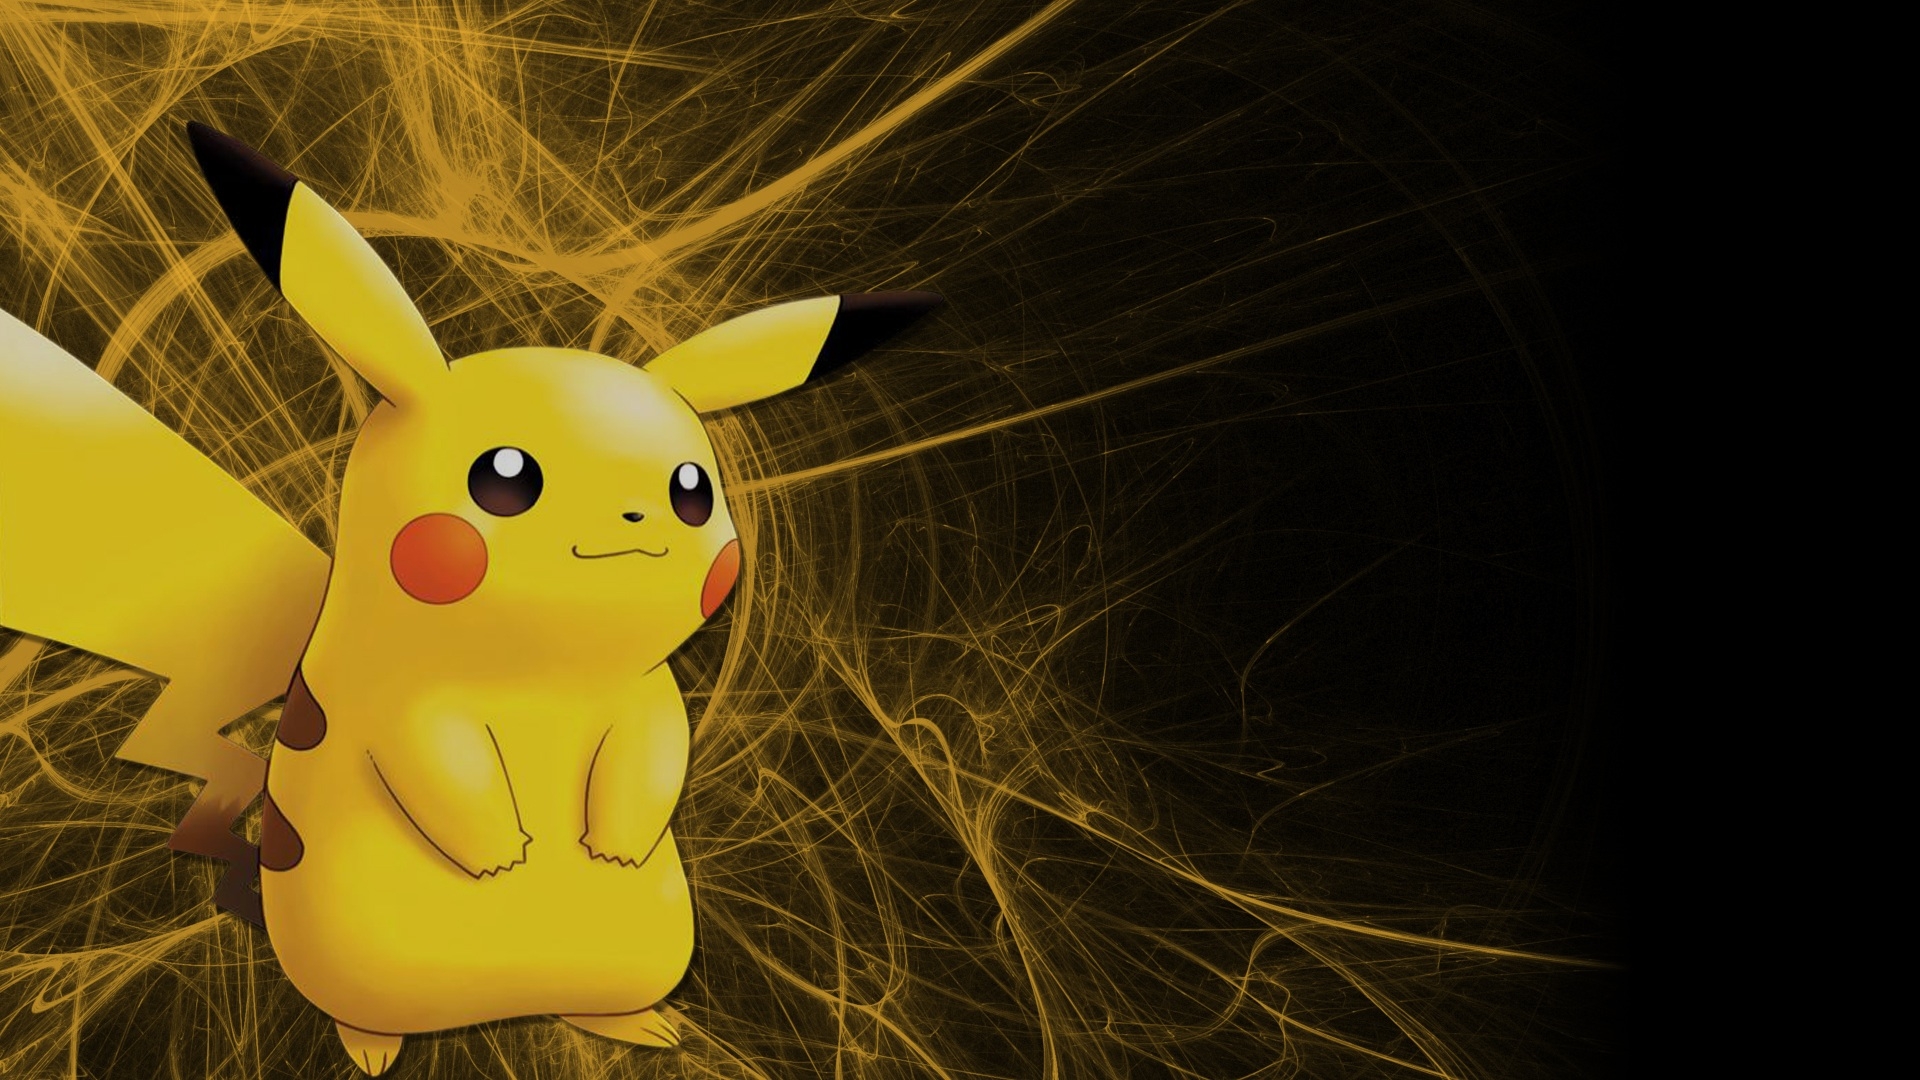 Pikachu Against A Simple Black Background Keeping It Classy